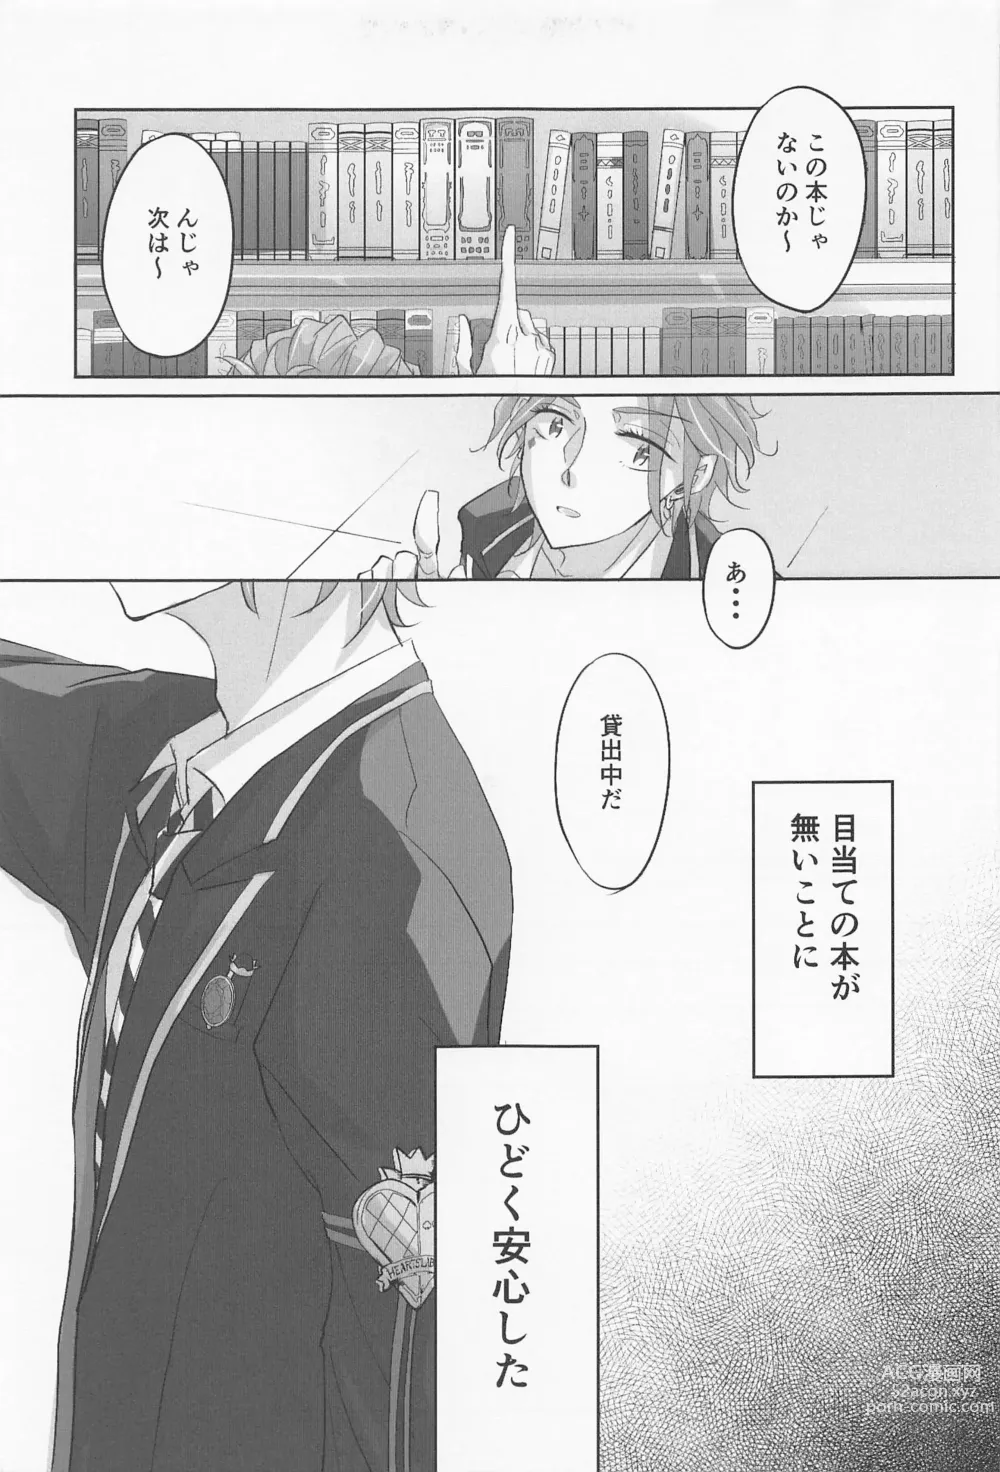 Page 12 of doujinshi My heart dedicated to you